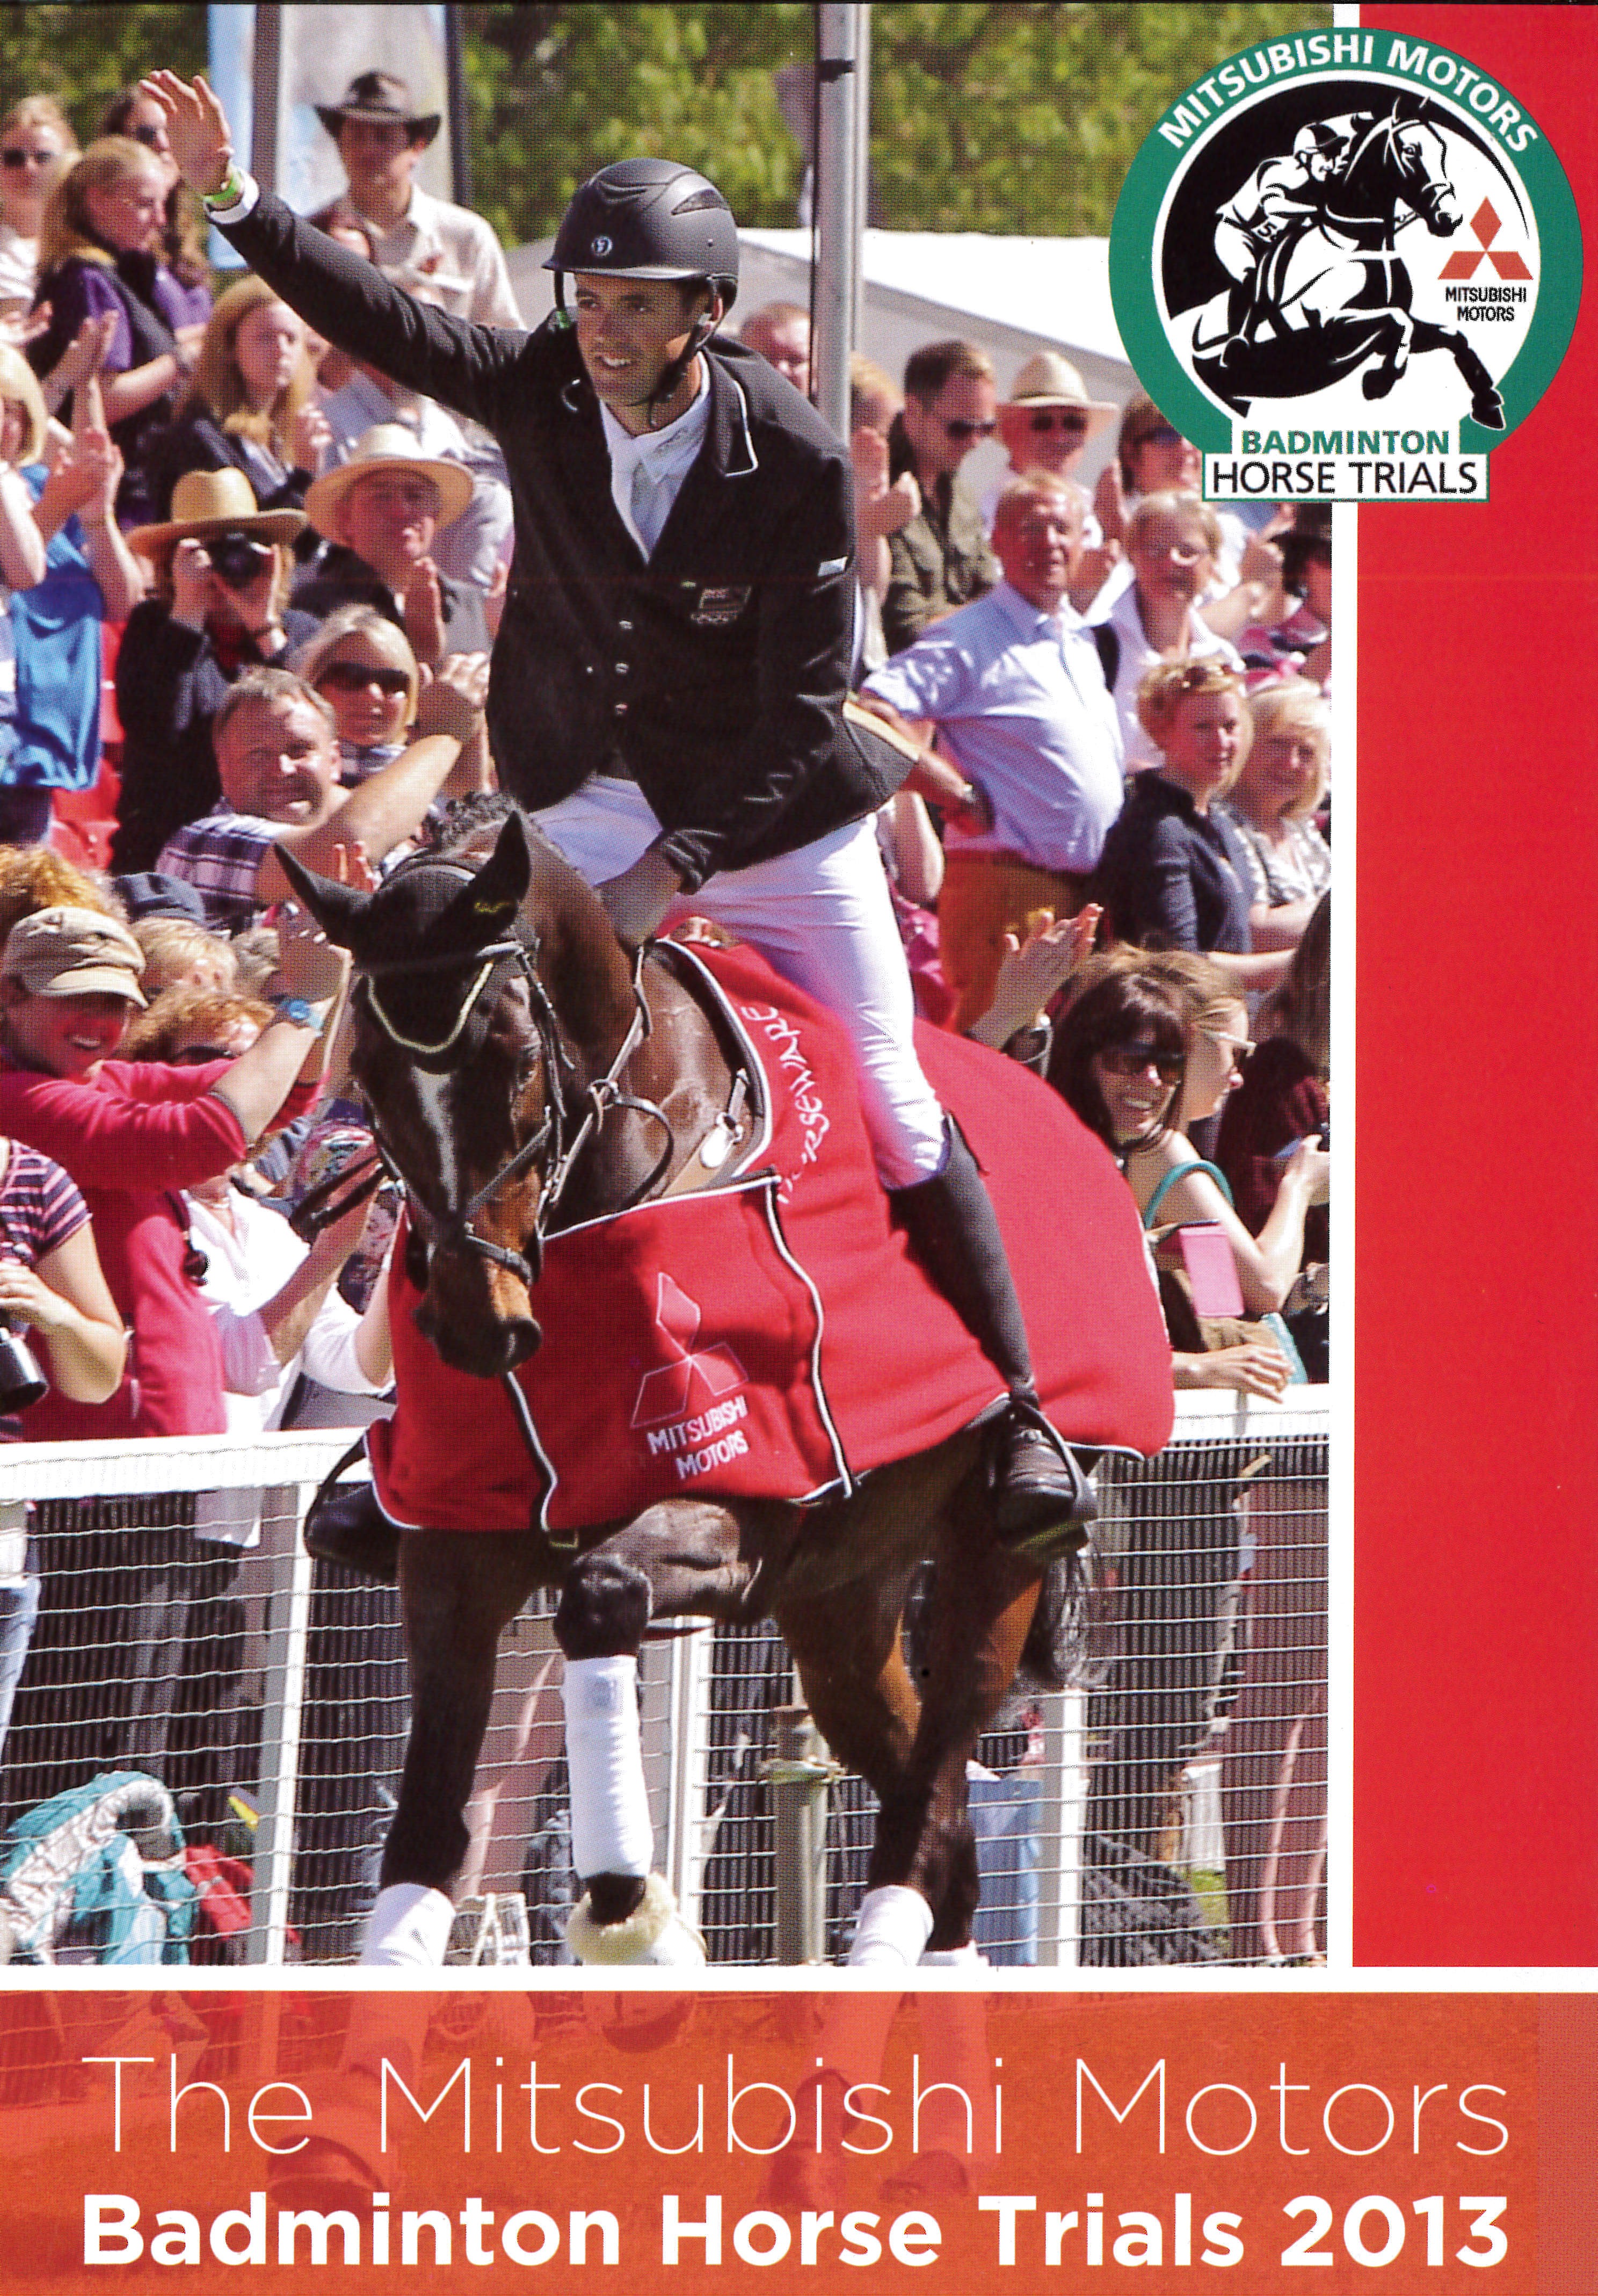 DVD Badminton Horse Trials 2013 Review from trot-online